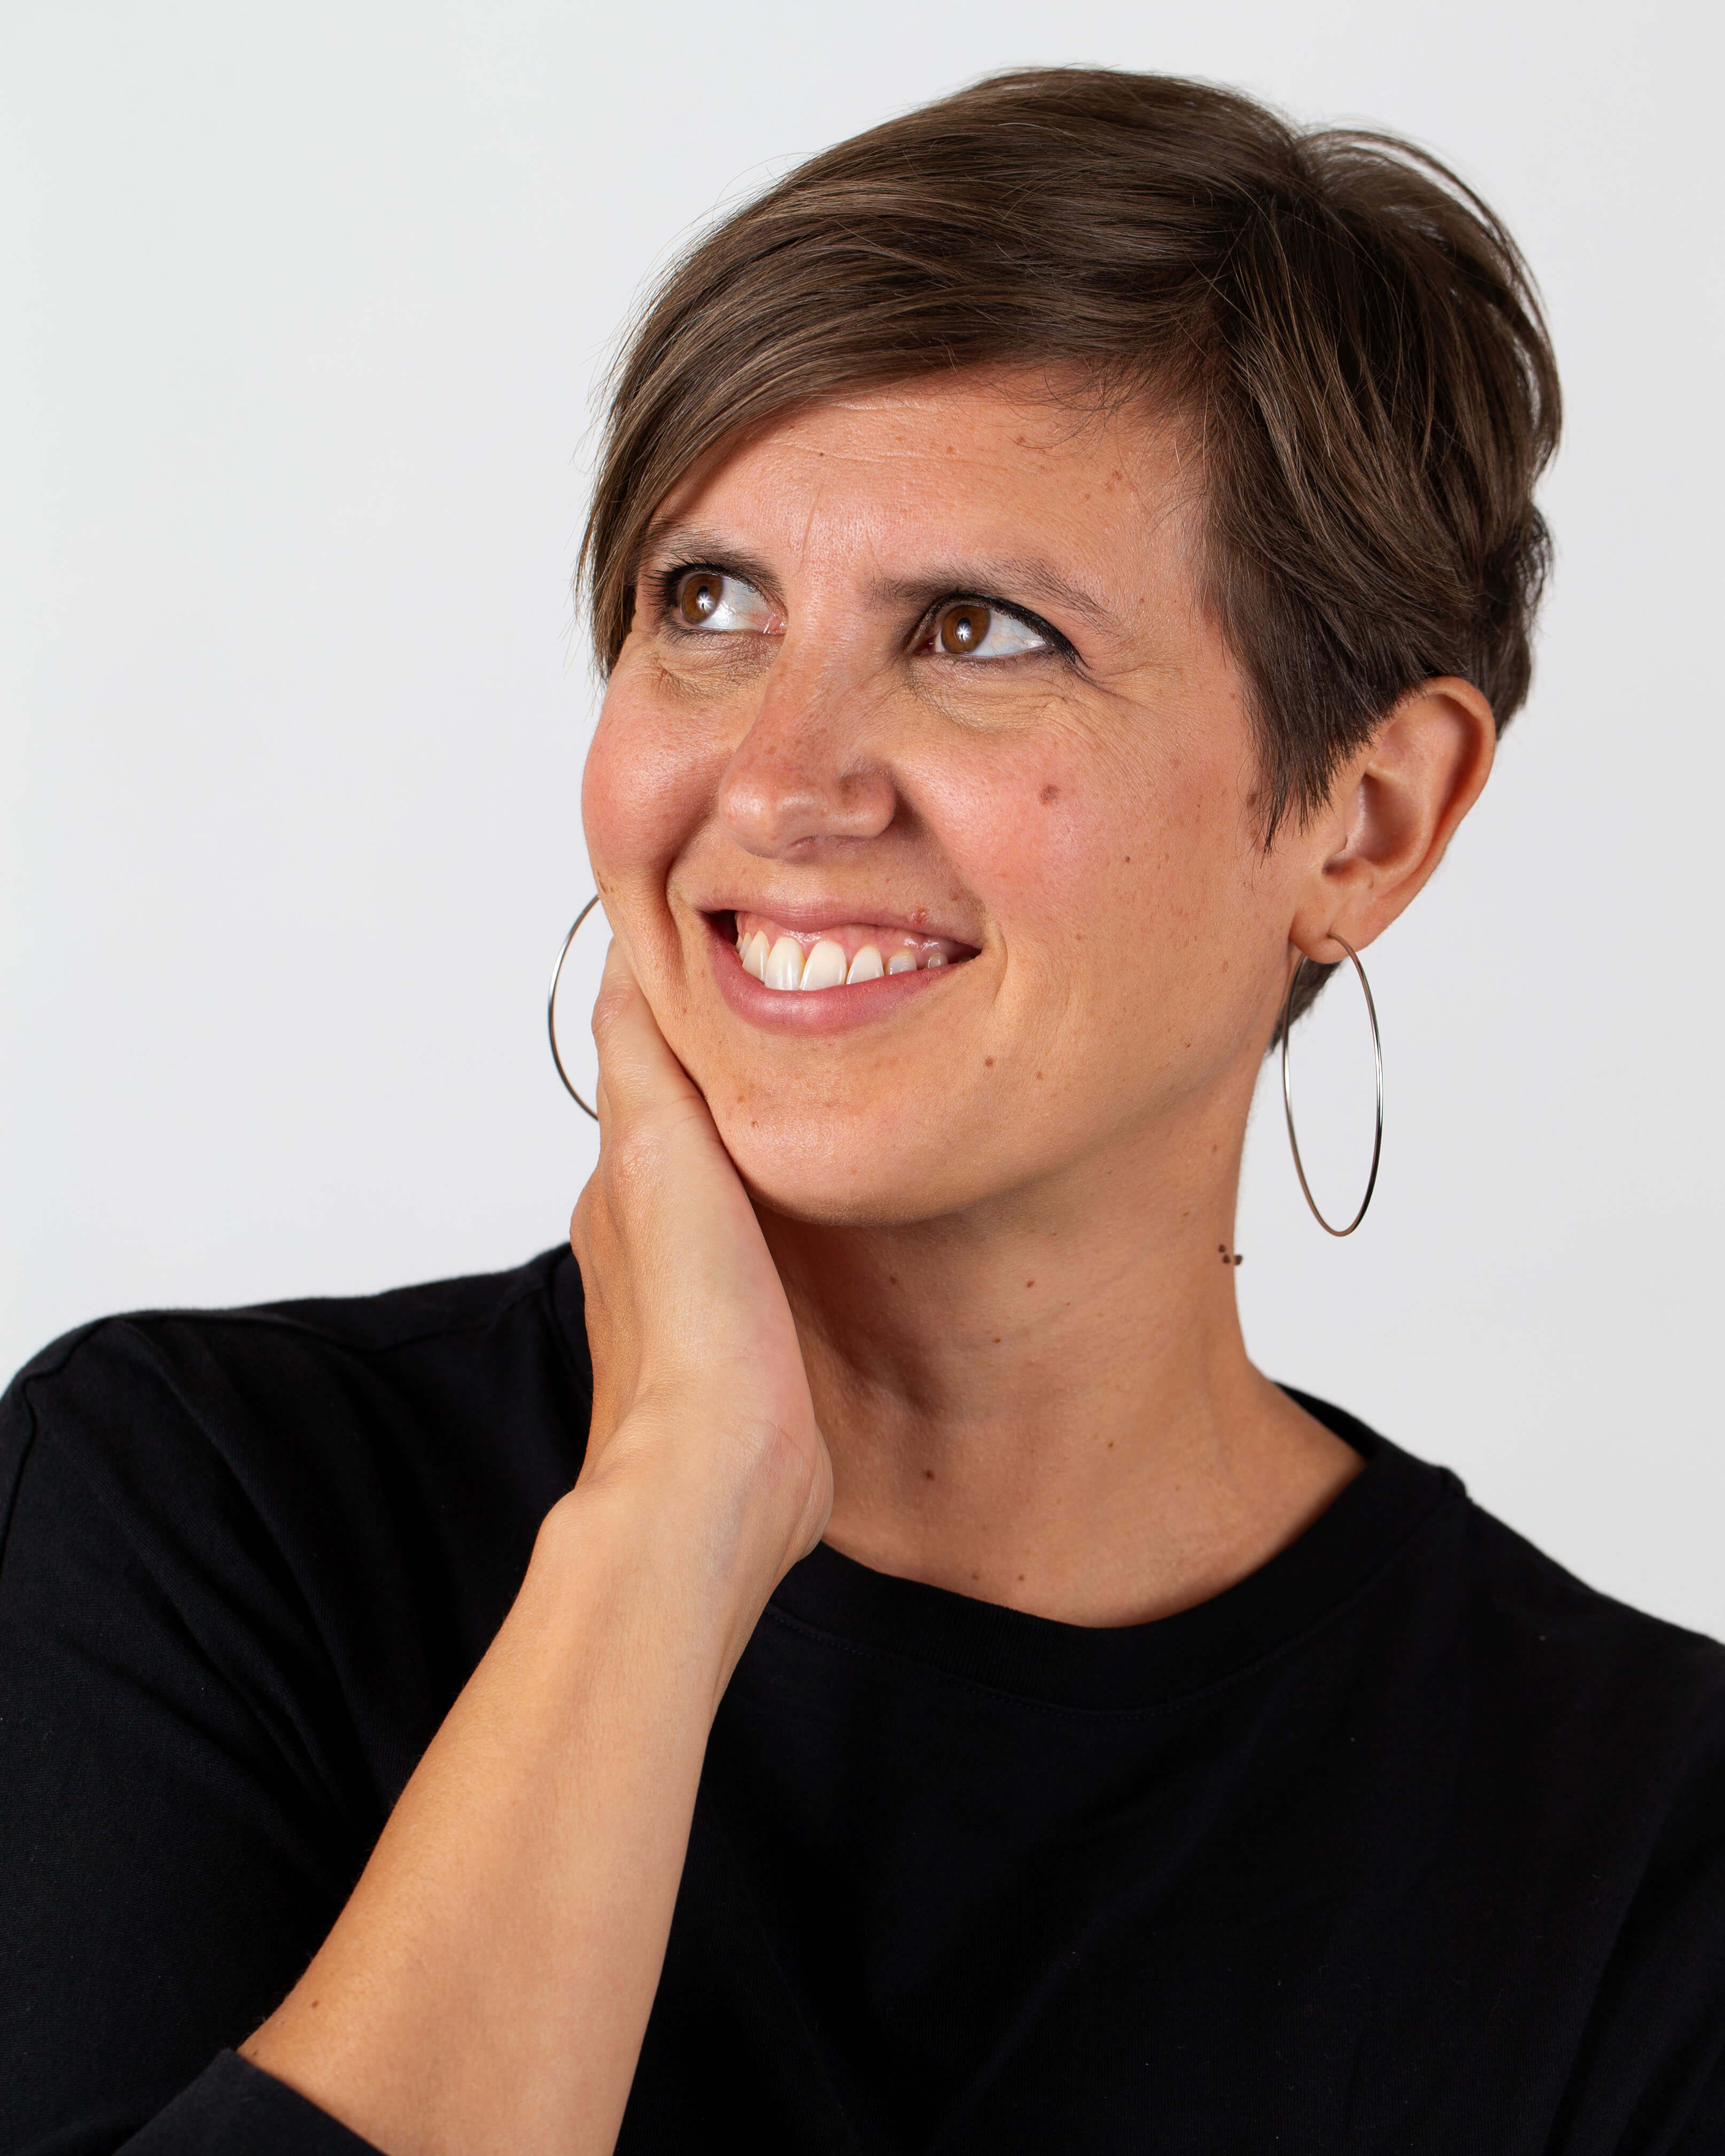 Anne Vaschetto joins Moxie Sozo as the Group Creative Director